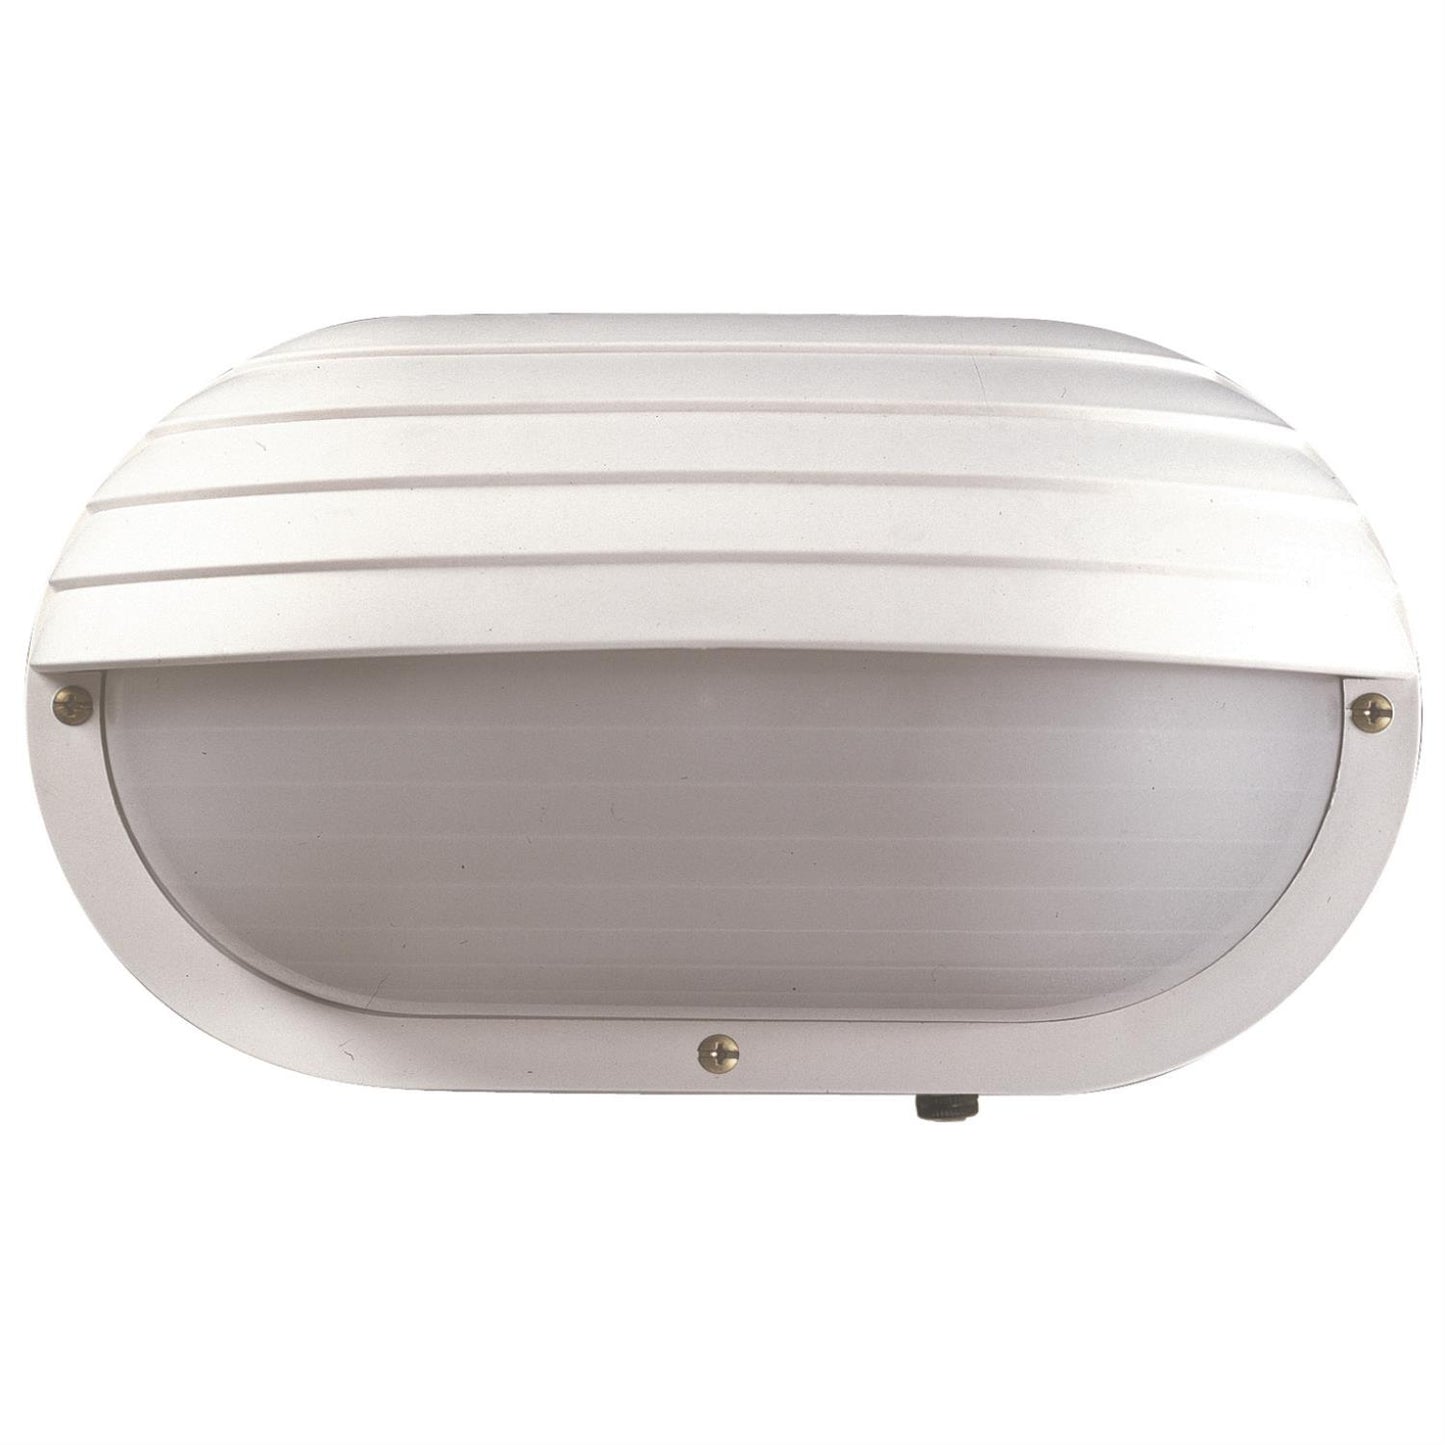 Sunlite Decorative Outdoor Energy Saving Eurostyle Oblong Hooded Fixture, White Finish, Frosted Lens